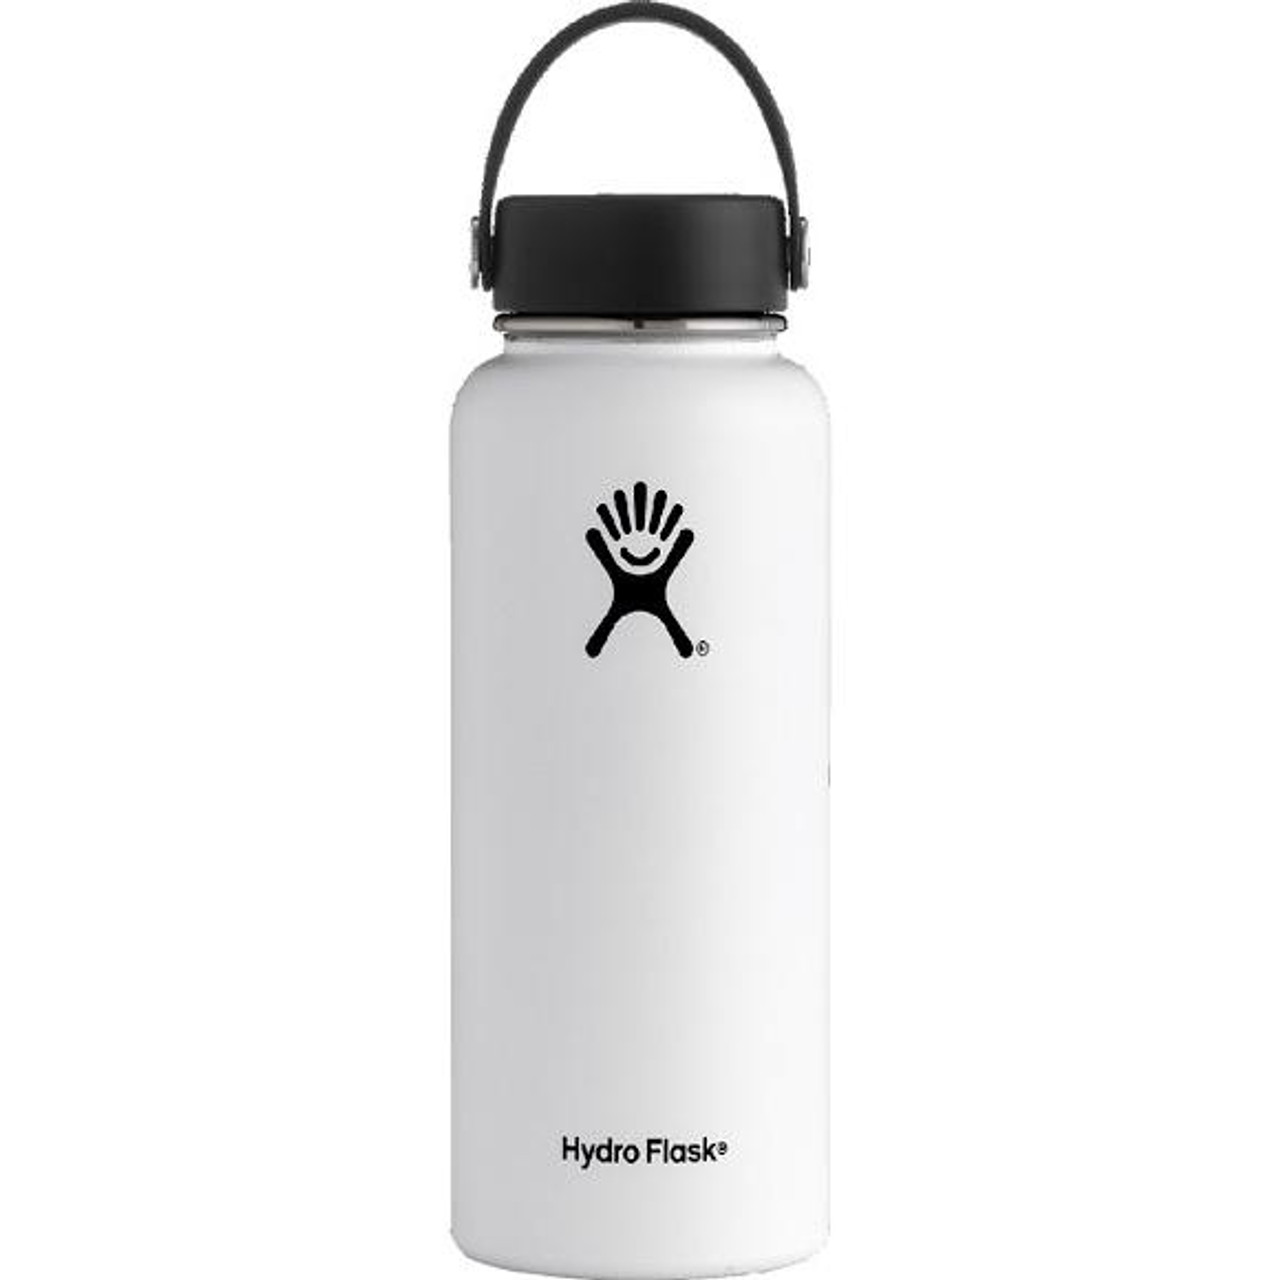 https://cdn11.bigcommerce.com/s-ra8e2ndq97/images/stencil/1280x1280/products/2914/15683/hydro-flask-40oz-wide-mouth__46922.1660691133.jpg?c=2